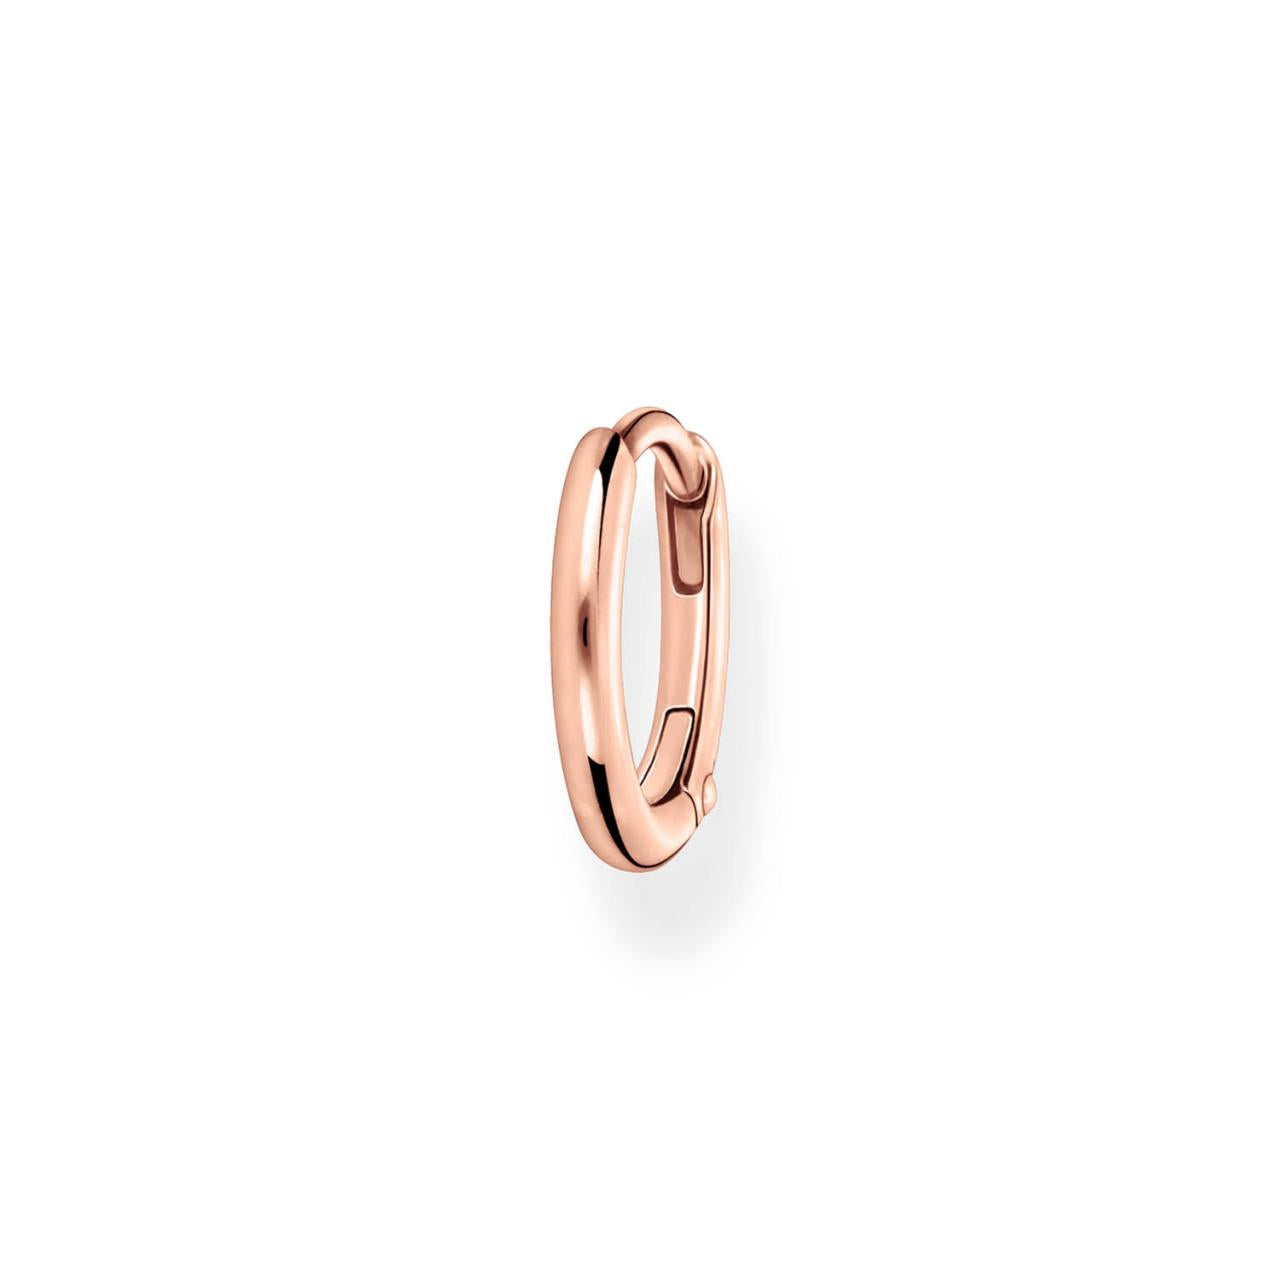 Rose gold plated hoops